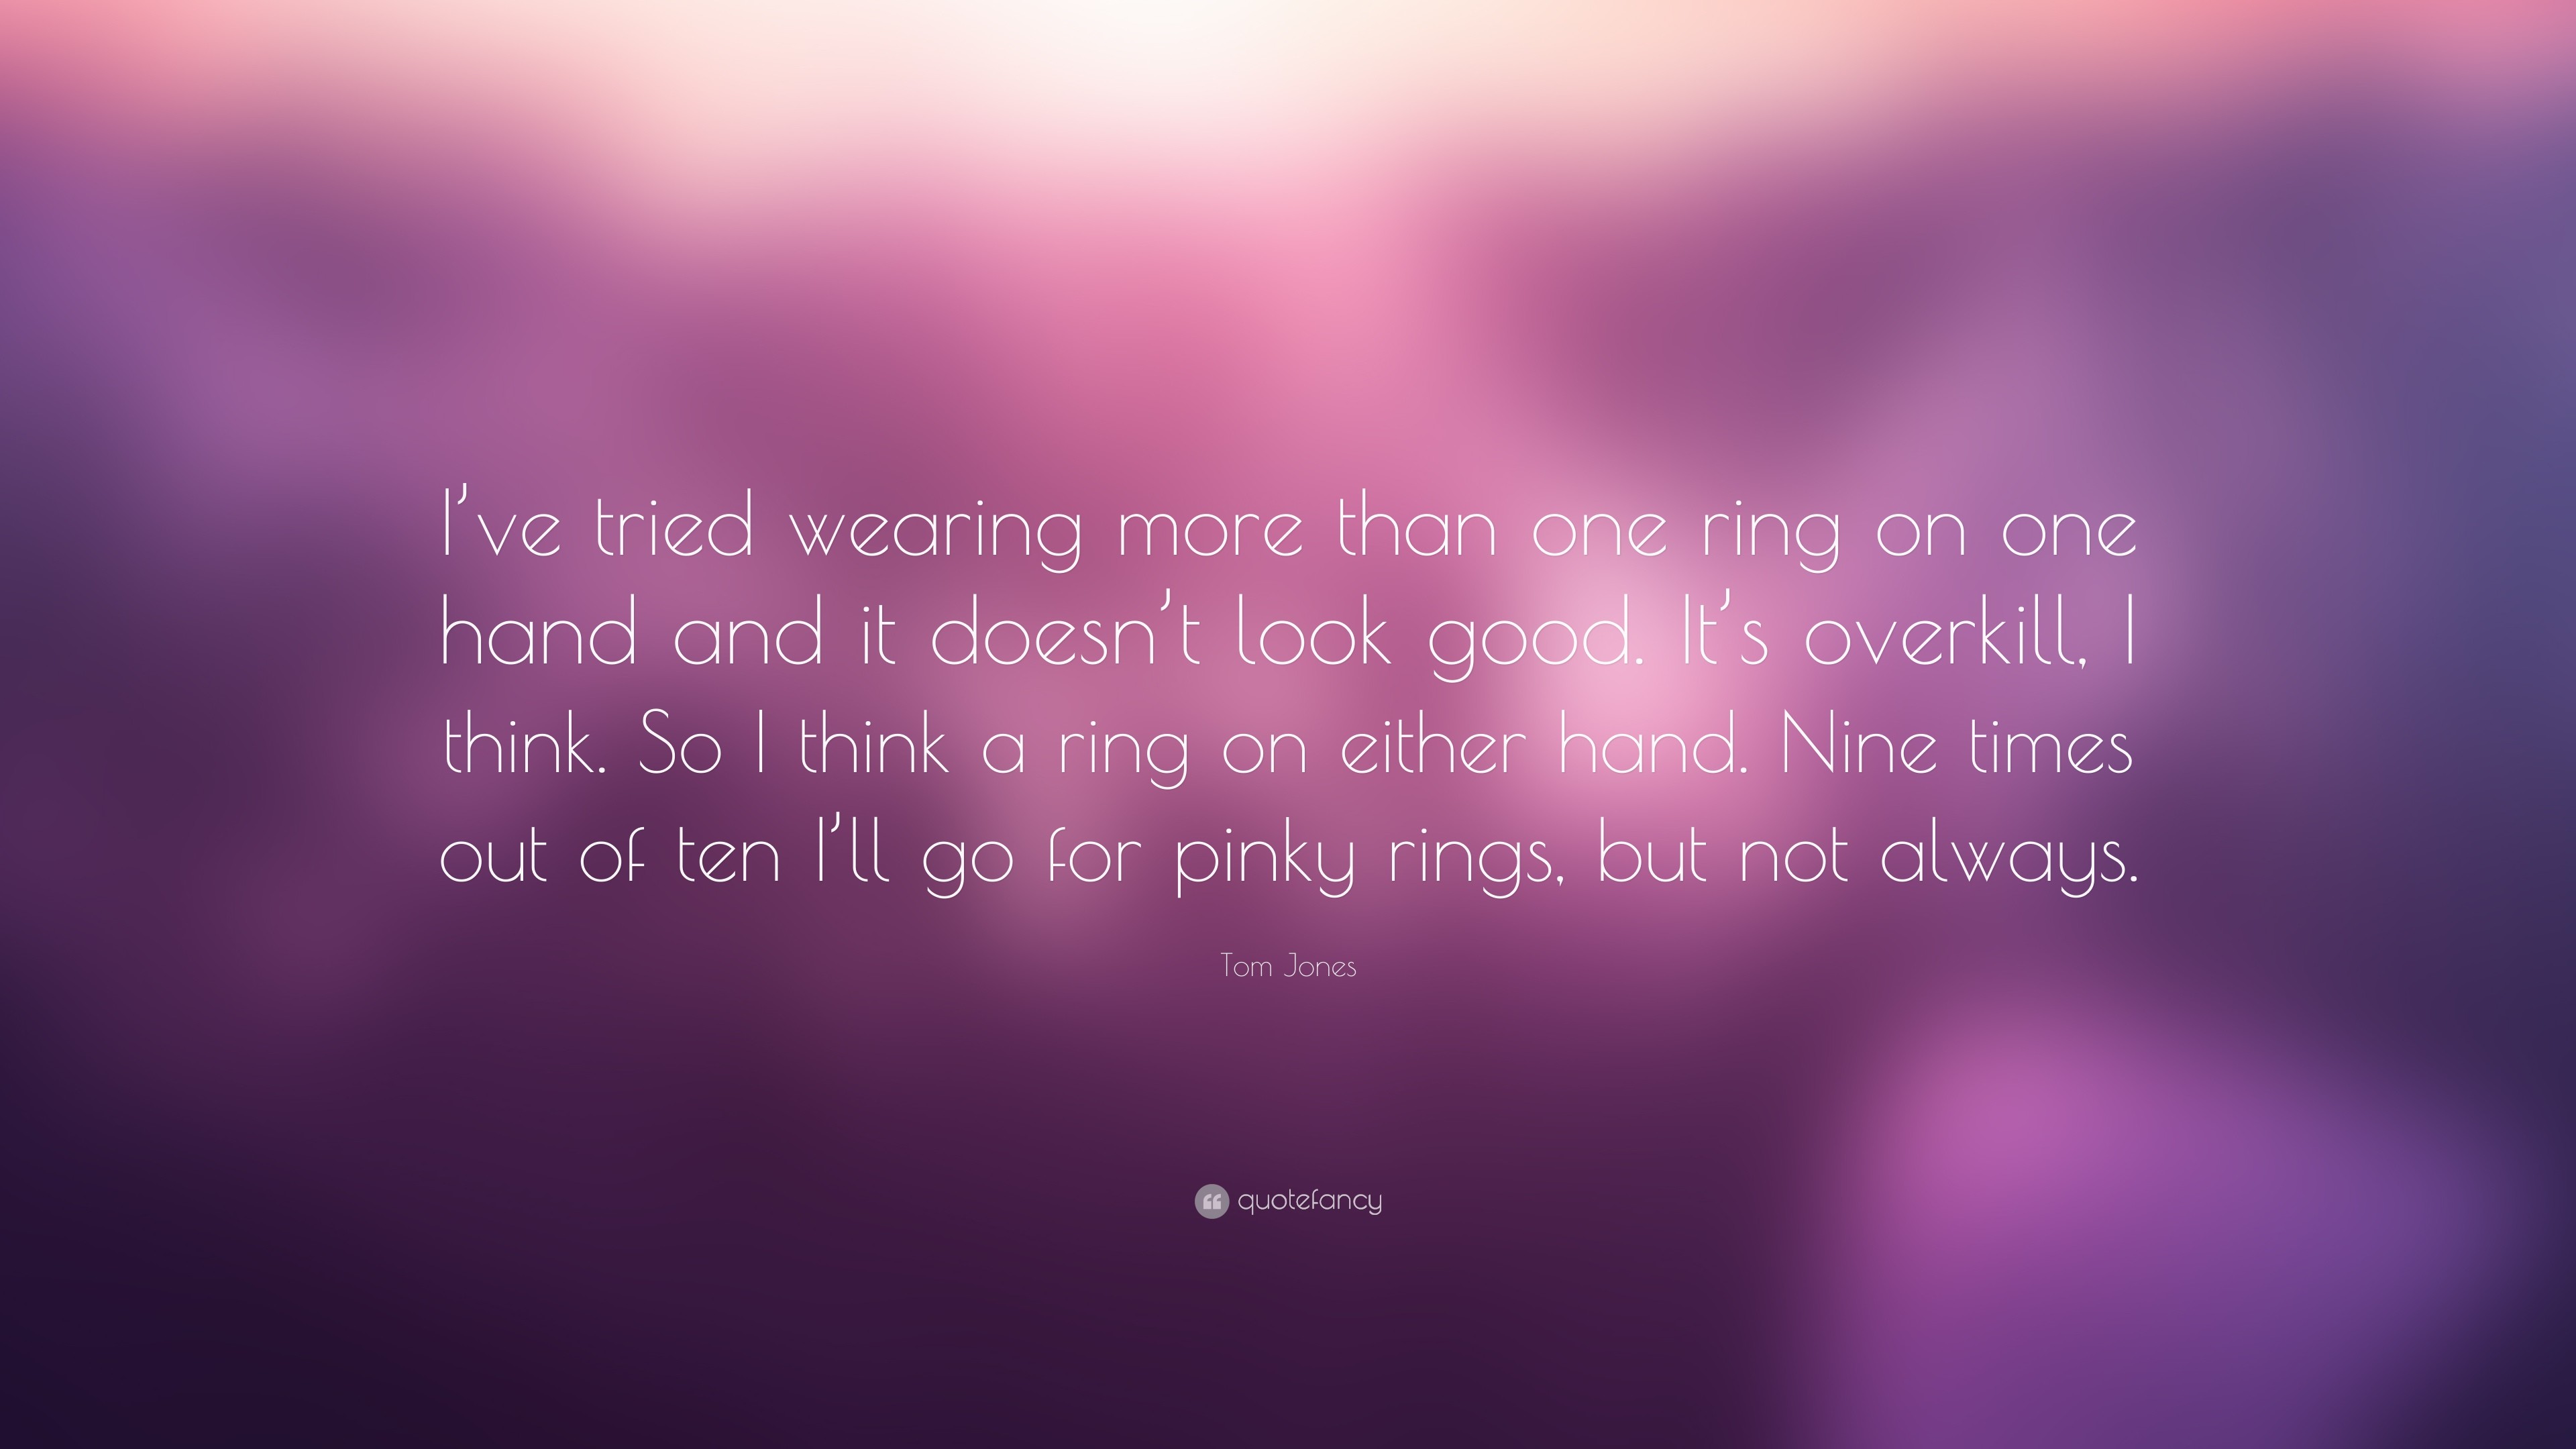 3840x2160 Tom Jones Quote: “I've tried wearing more than one ring on one